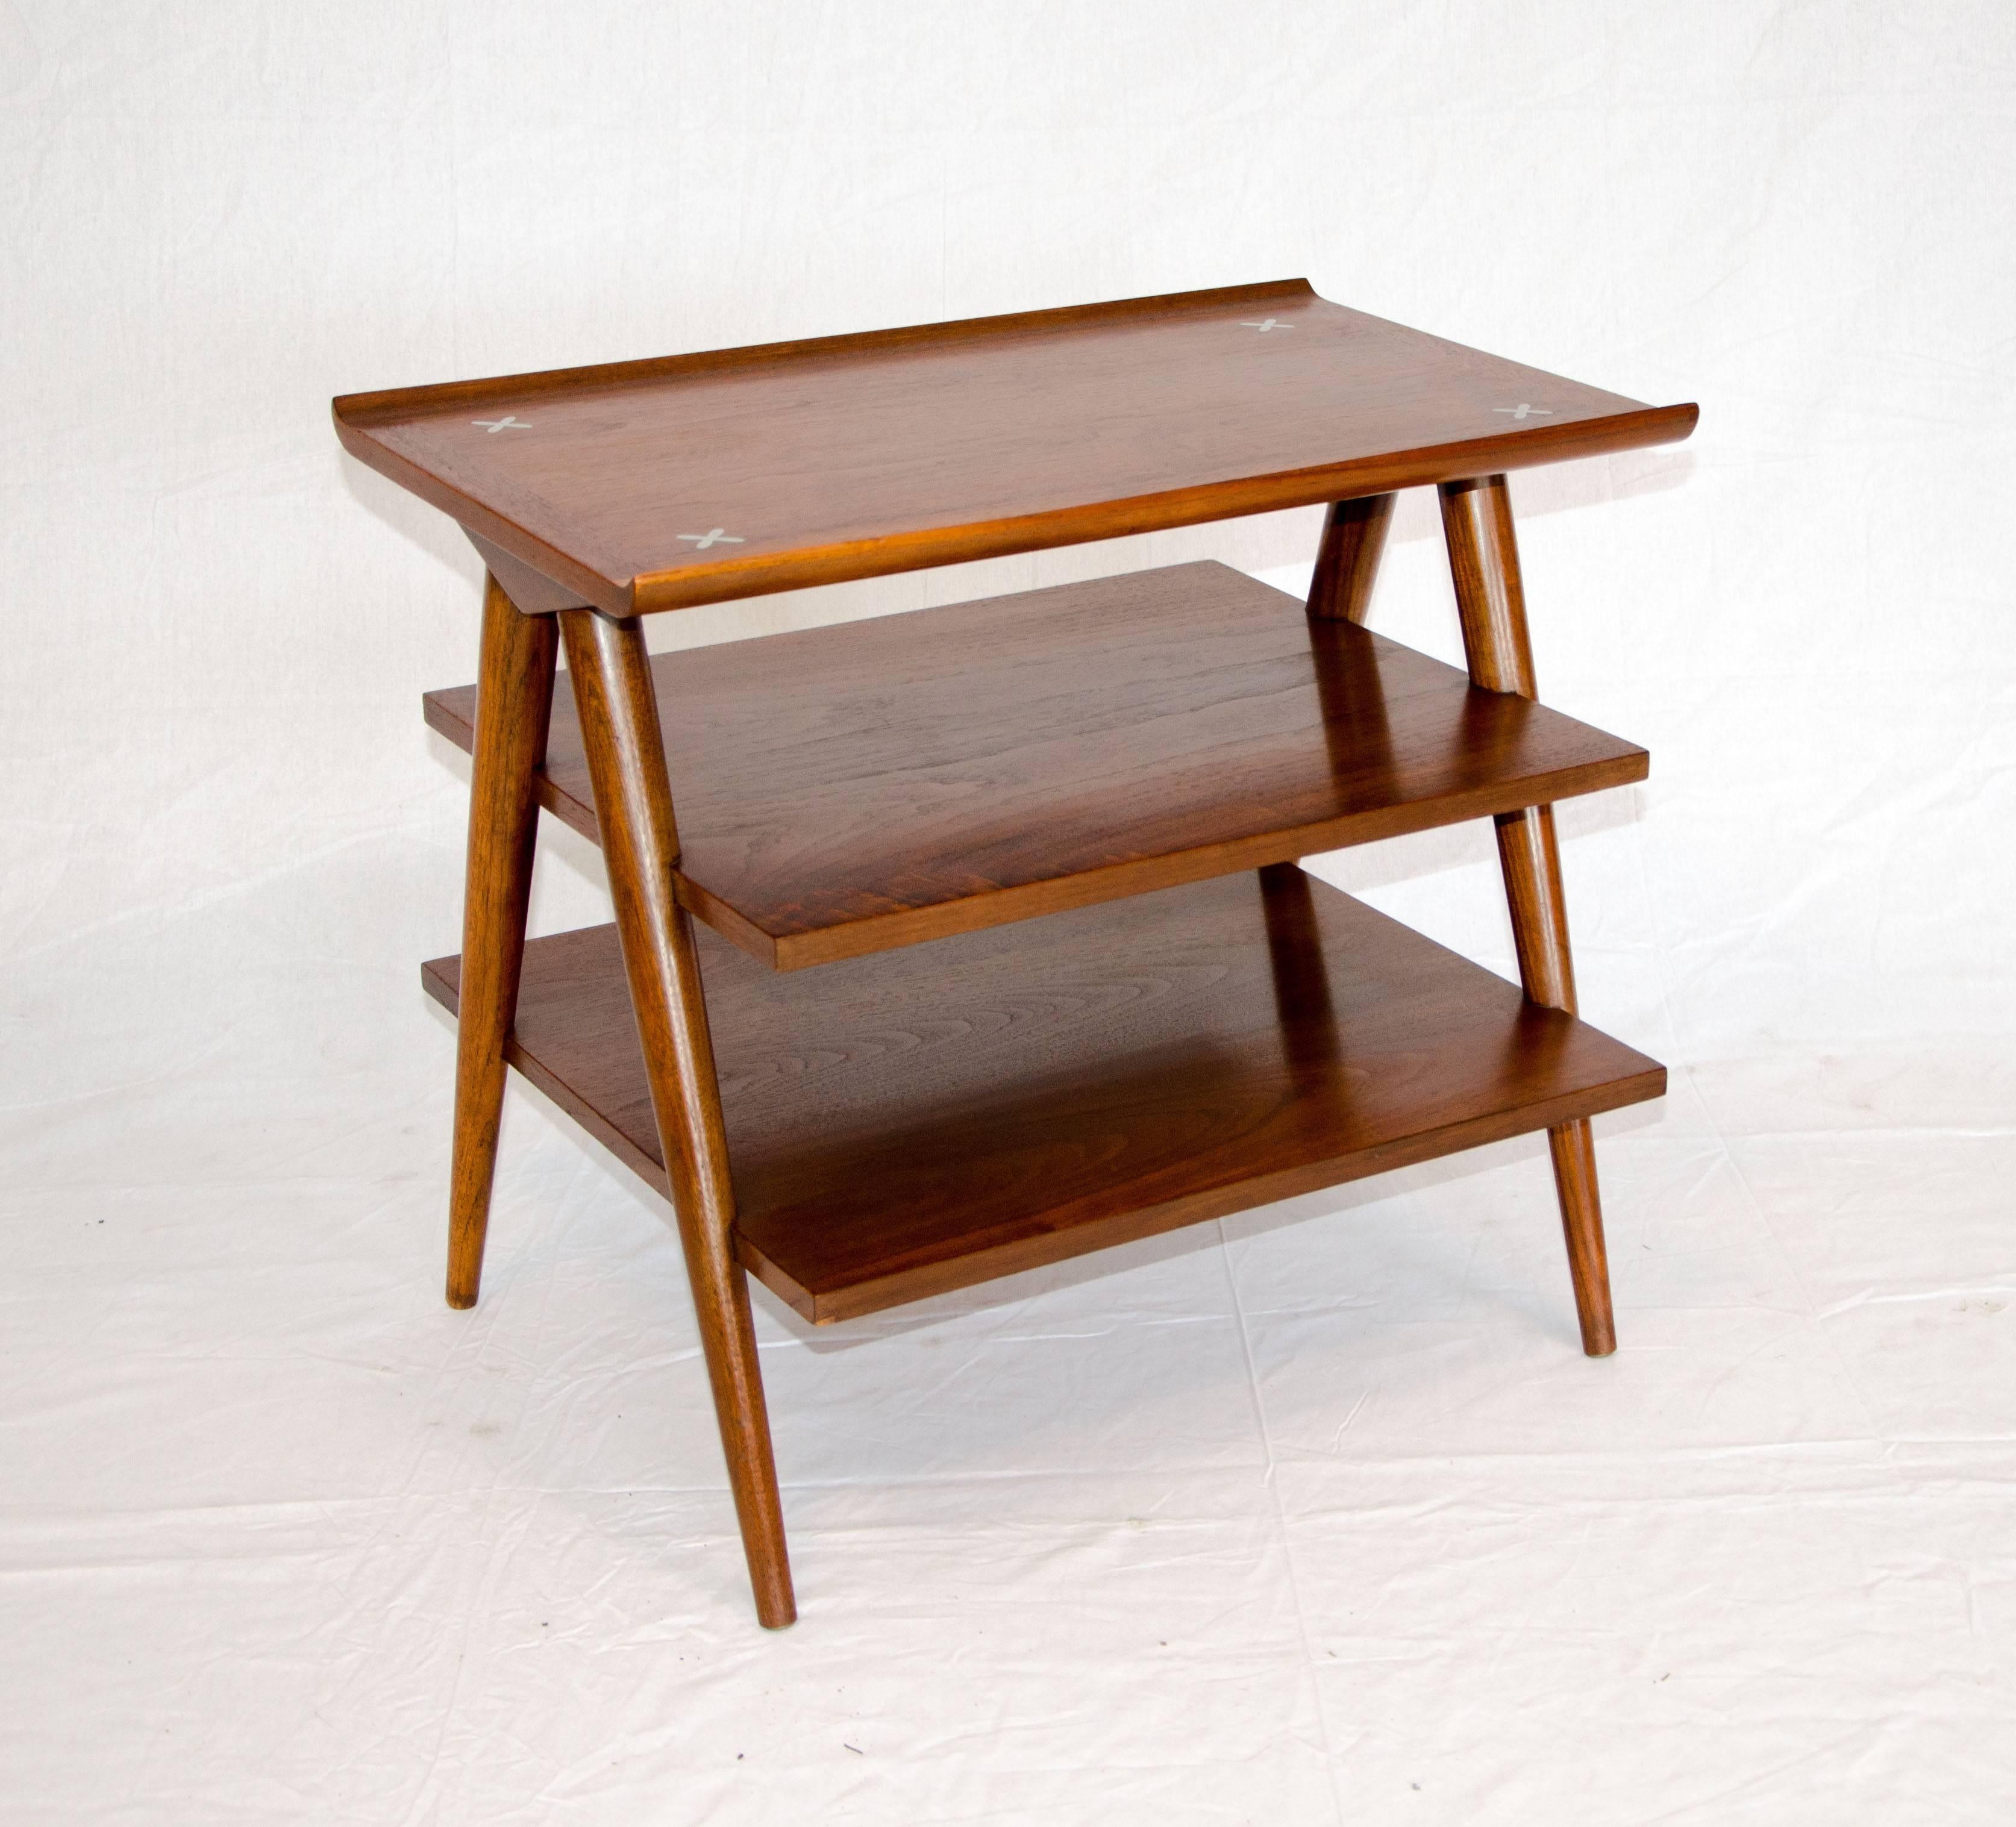 Useful three tiered walnut magazine table accented with four inlaid aluminum cross designs and two upturned edges on the top tier. The three graduated tiers are attached to the angled legs at both ends. There is 6 1/2